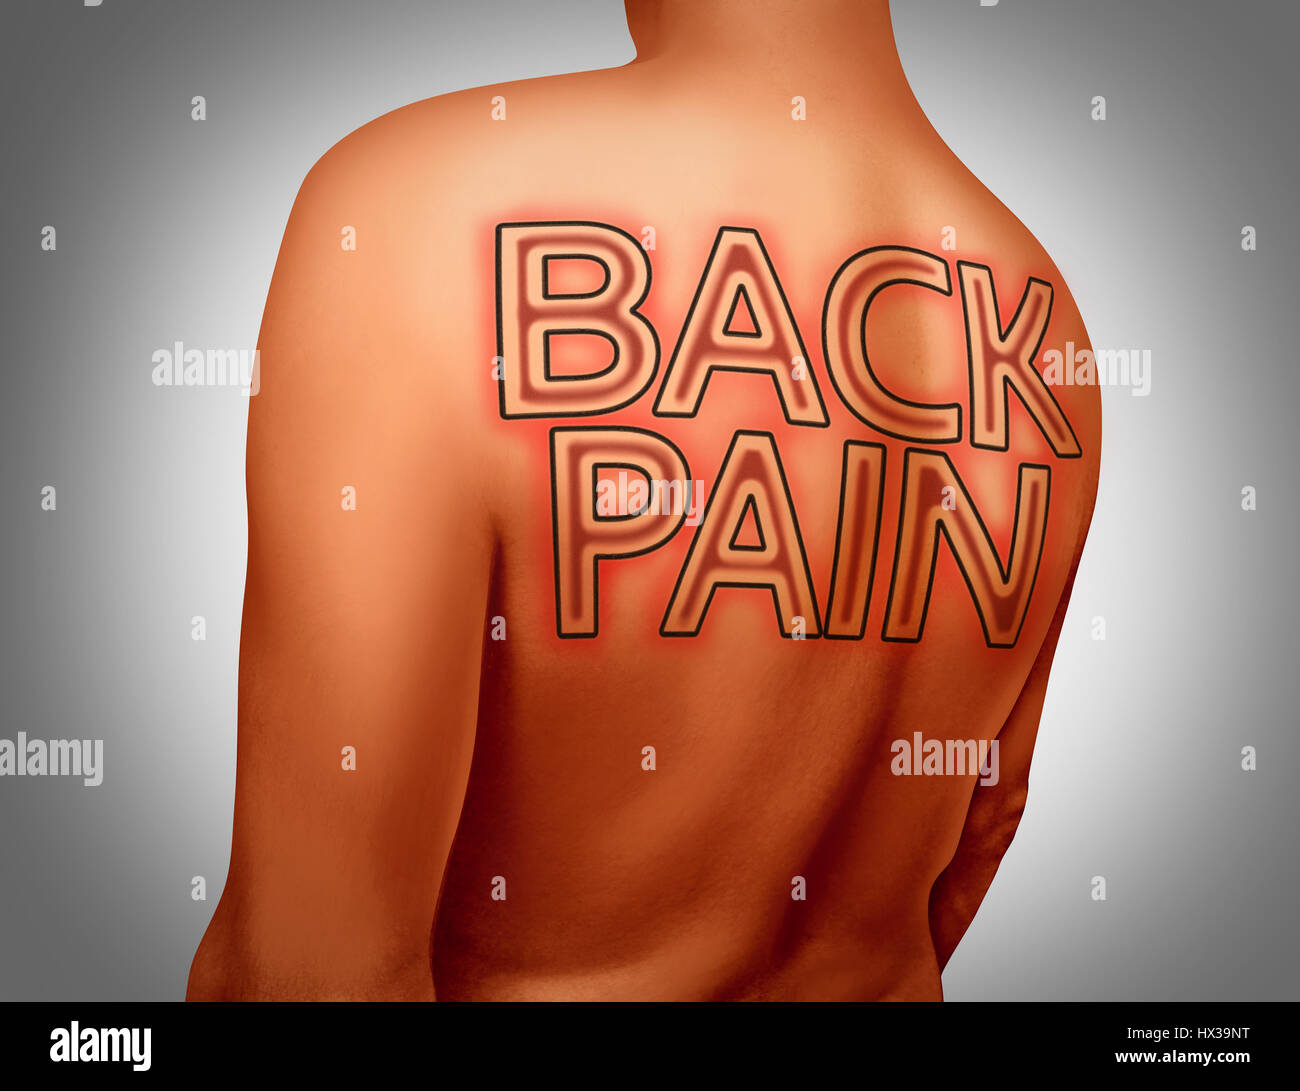 Back pain medical concept as text tattoo art on human skin as a muscular health or skeletal ache or spine injury with 3D illustration elements. Stock Photo